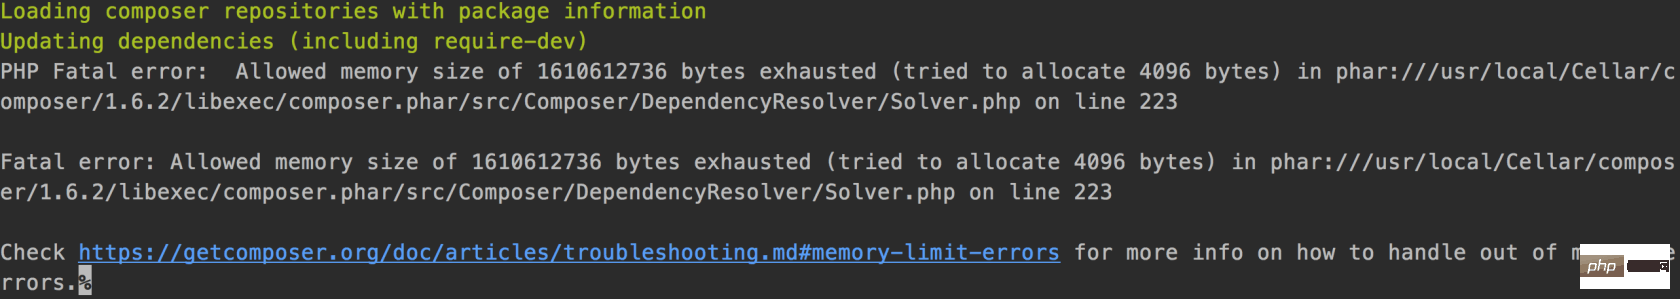 composer 报错：PHP Fatal error:  Allowed memory size of 1610612736 bytes exhausted (tried to allocate 4096 bytes)